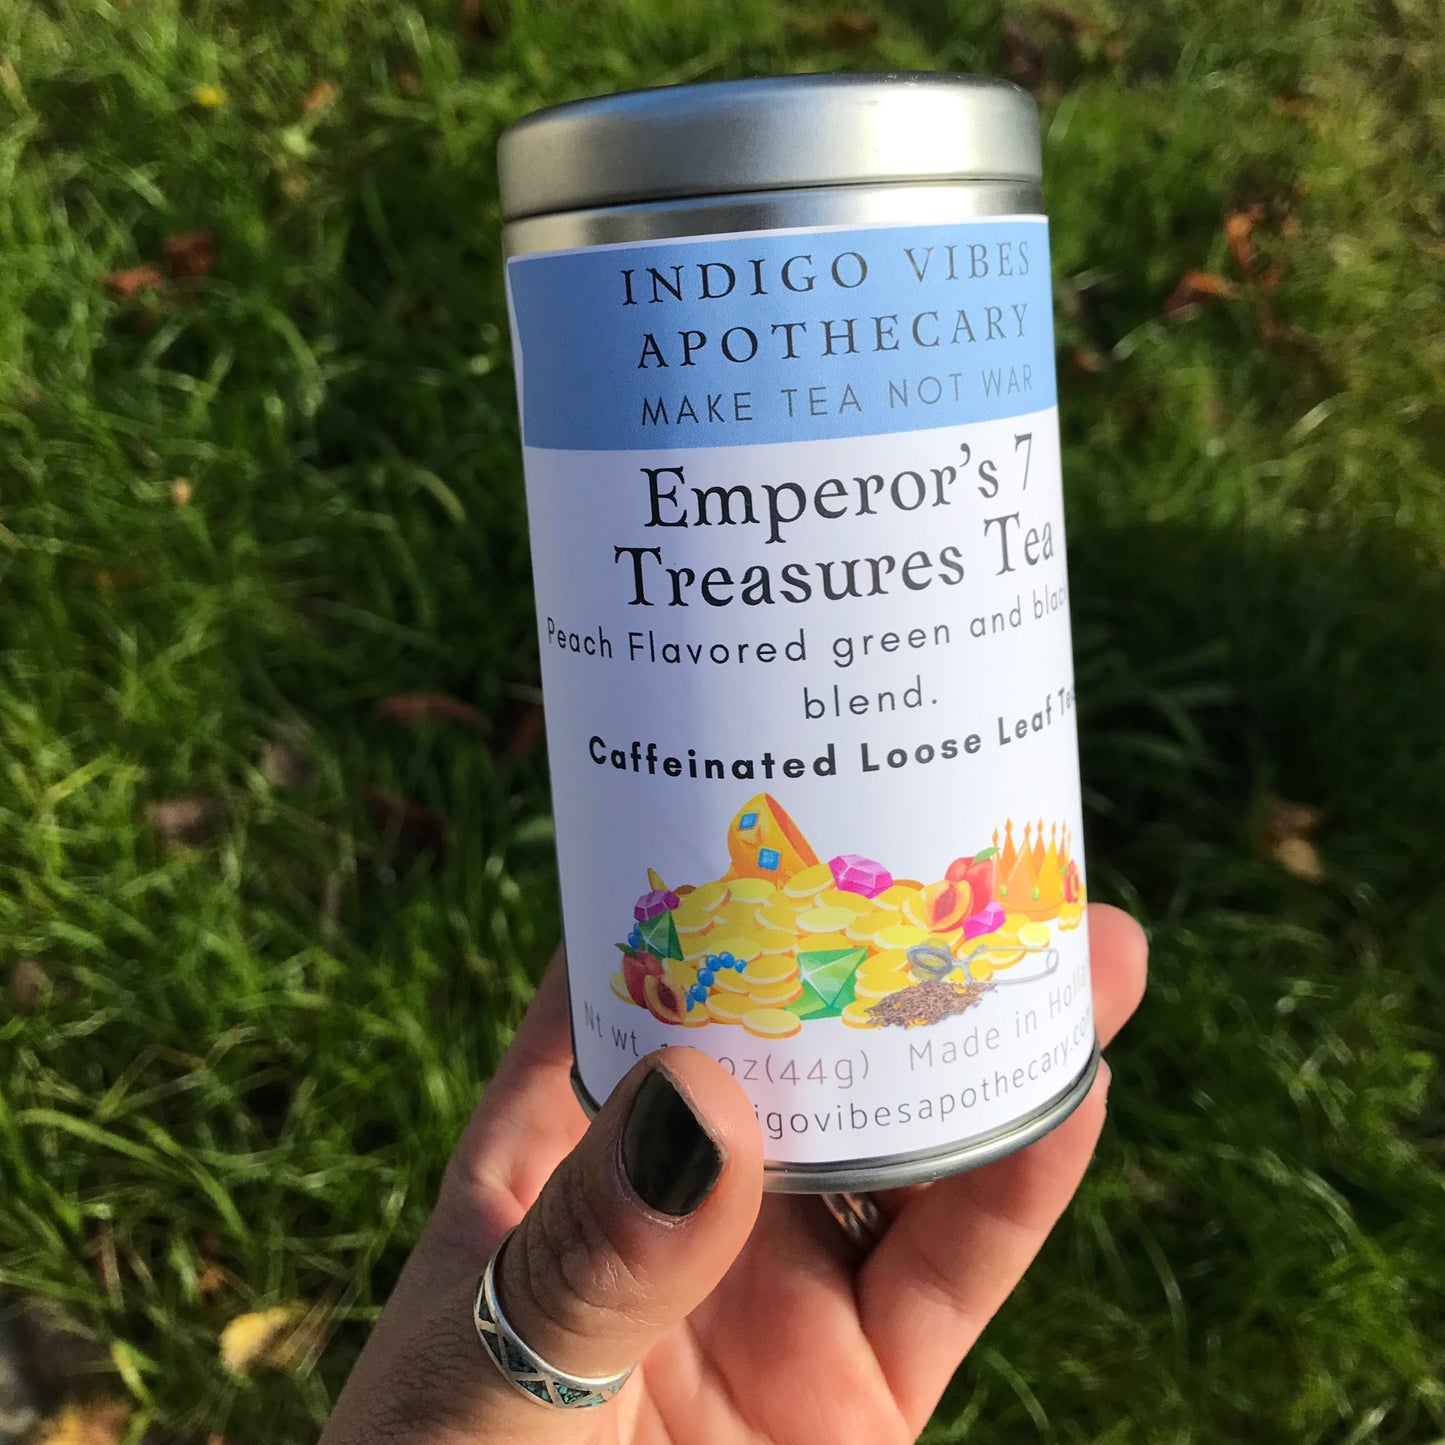 Emperor's 7 Treasures - 1.8 oz canister